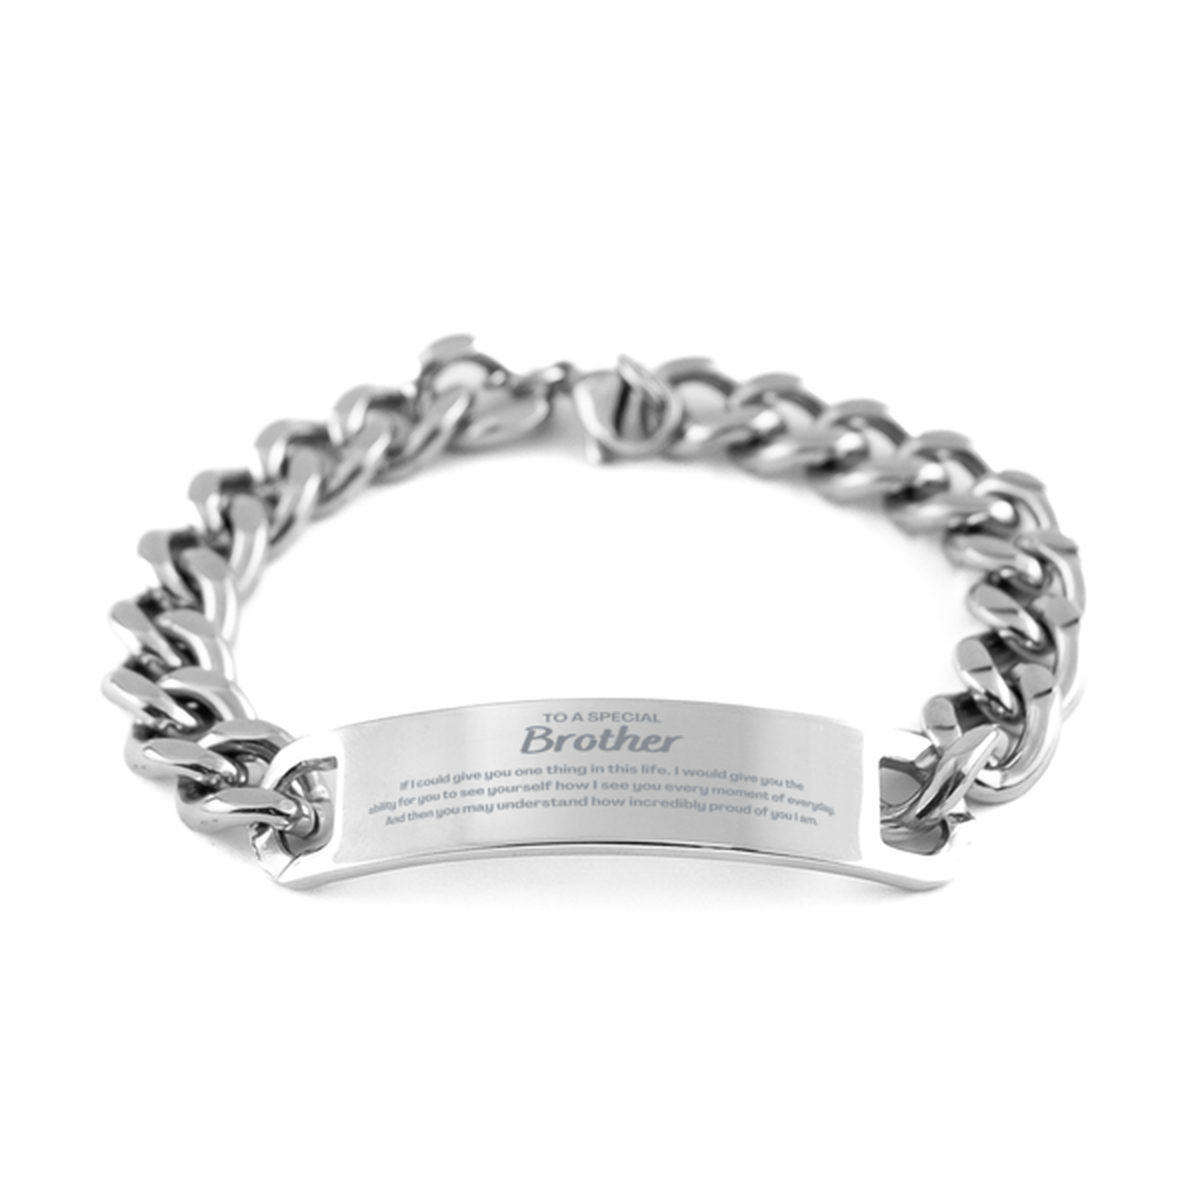 To My Brother Cuban Chain Stainless Steel Bracelet, Gifts For Brother Engraved, Inspirational Gifts for Christmas Birthday, Epic Gifts for Brother To A Special Brother how incredibly proud of you I am